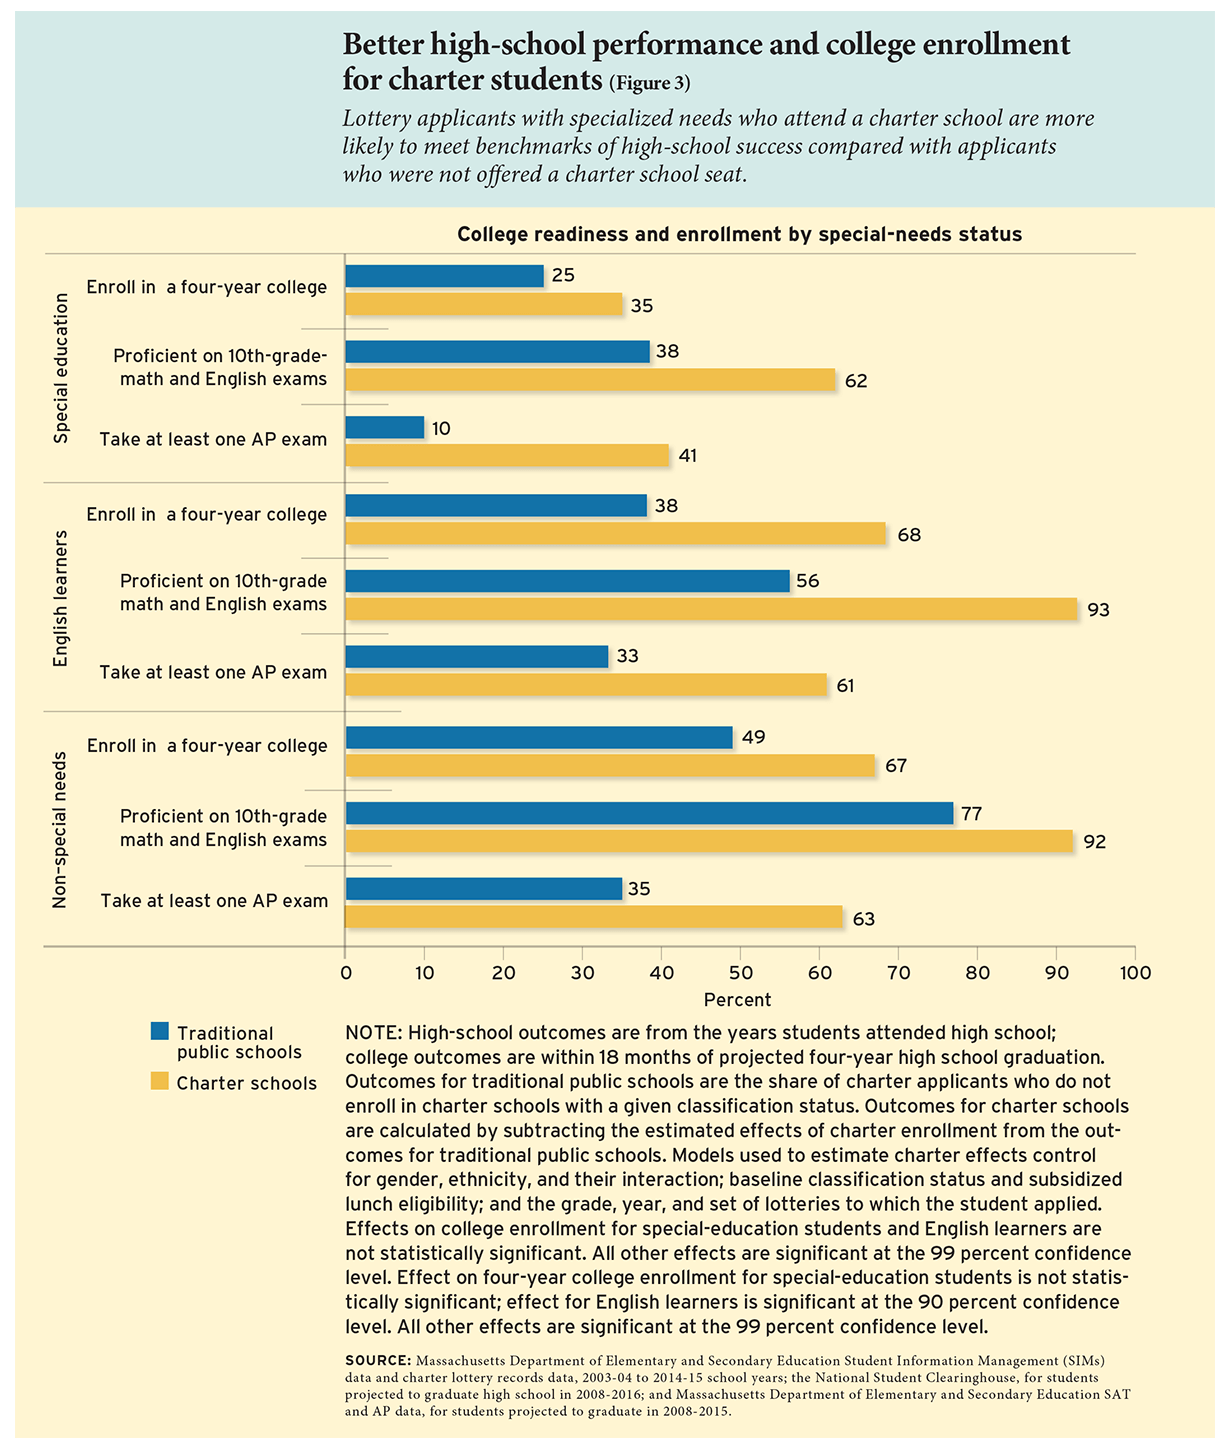 Better high-school performance and college enrollment for charter students (Figure 3)